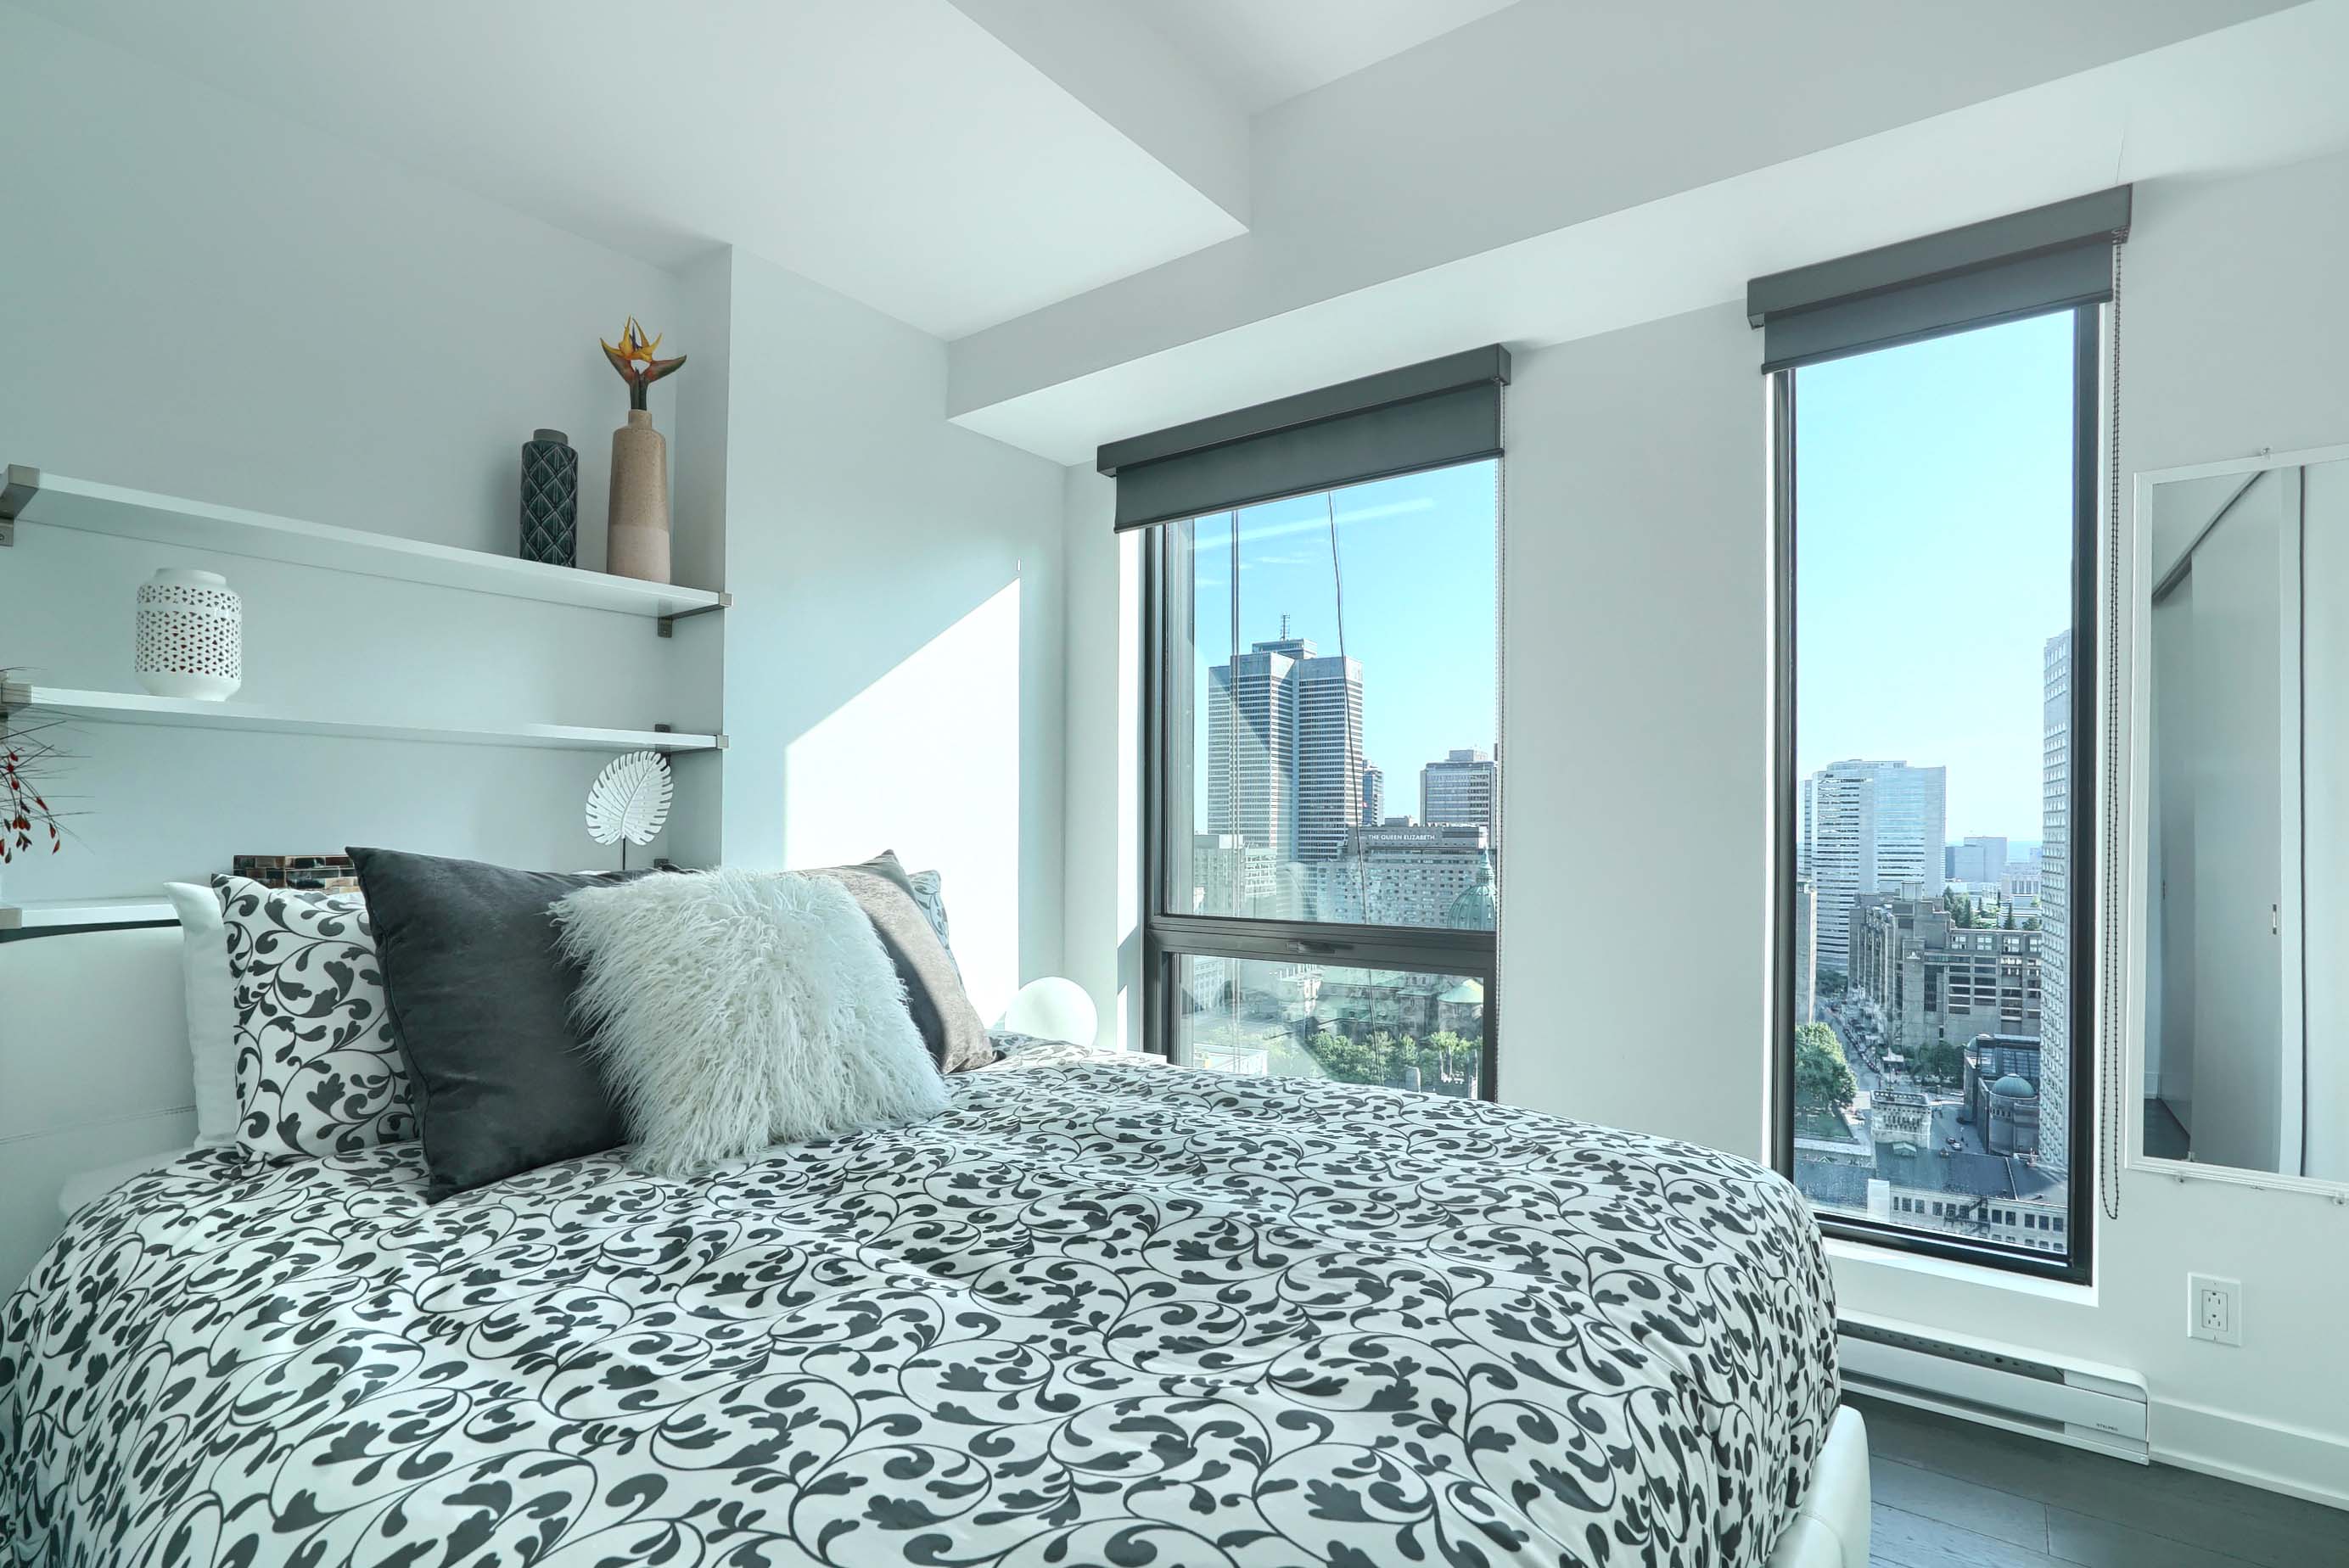 Angled view of the bedroom showing the white and gray plush comforter, fluffy accent pillows, designer shelving and floor-to-ceiling window in this spécialiste en appartements meublés corporatifs à Montréal 